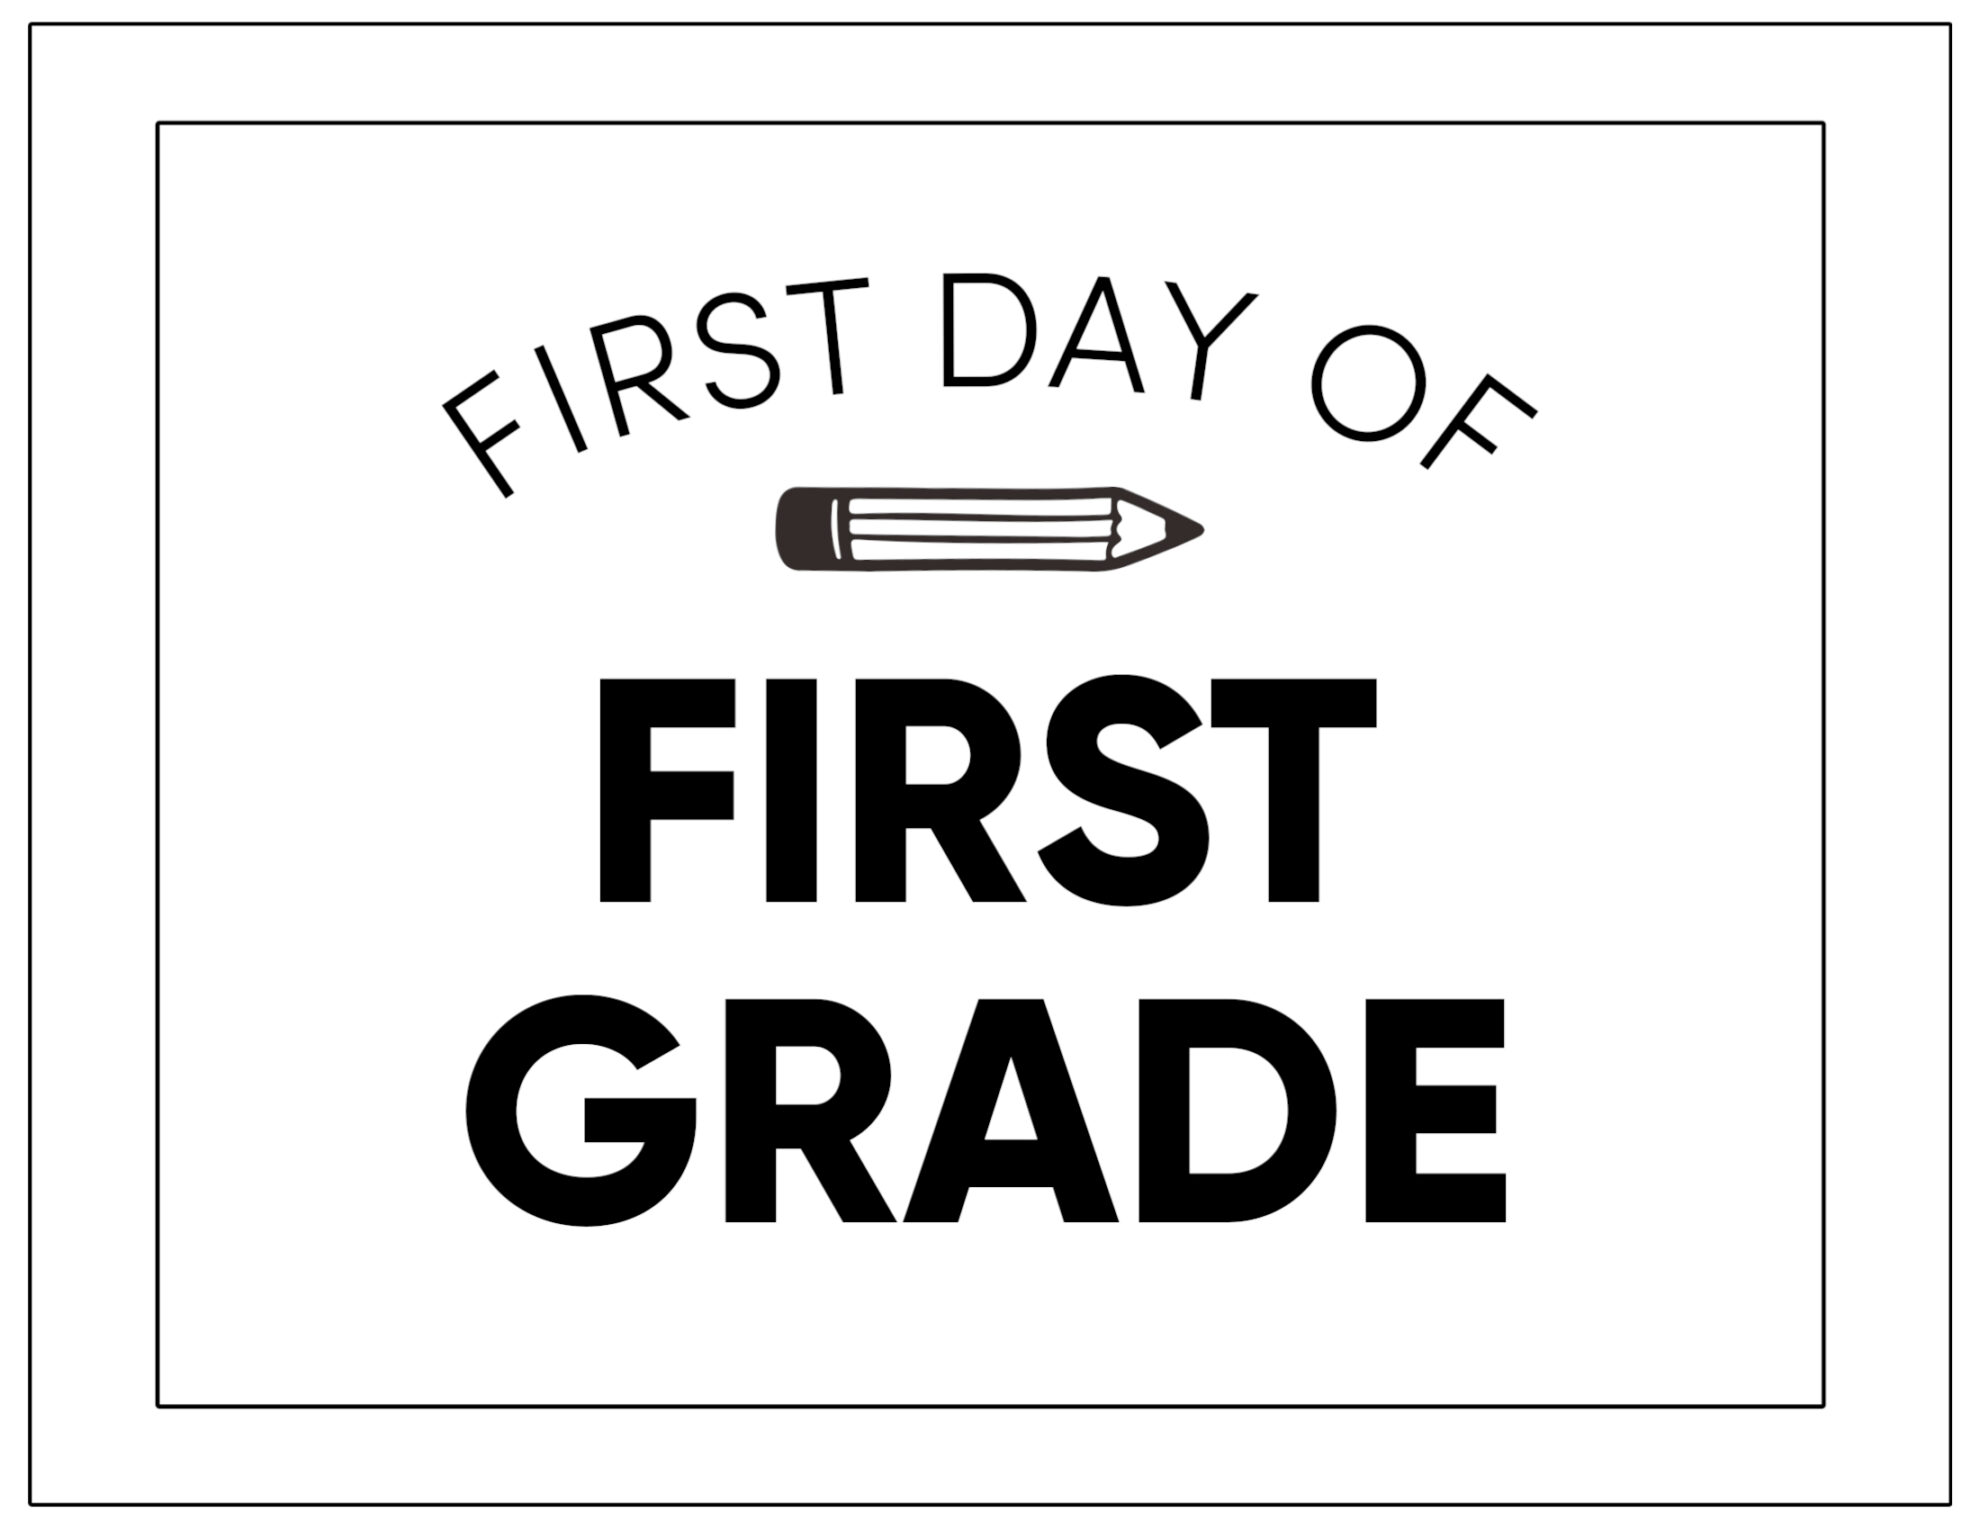 printable-first-day-of-school-signs-paper-trail-design